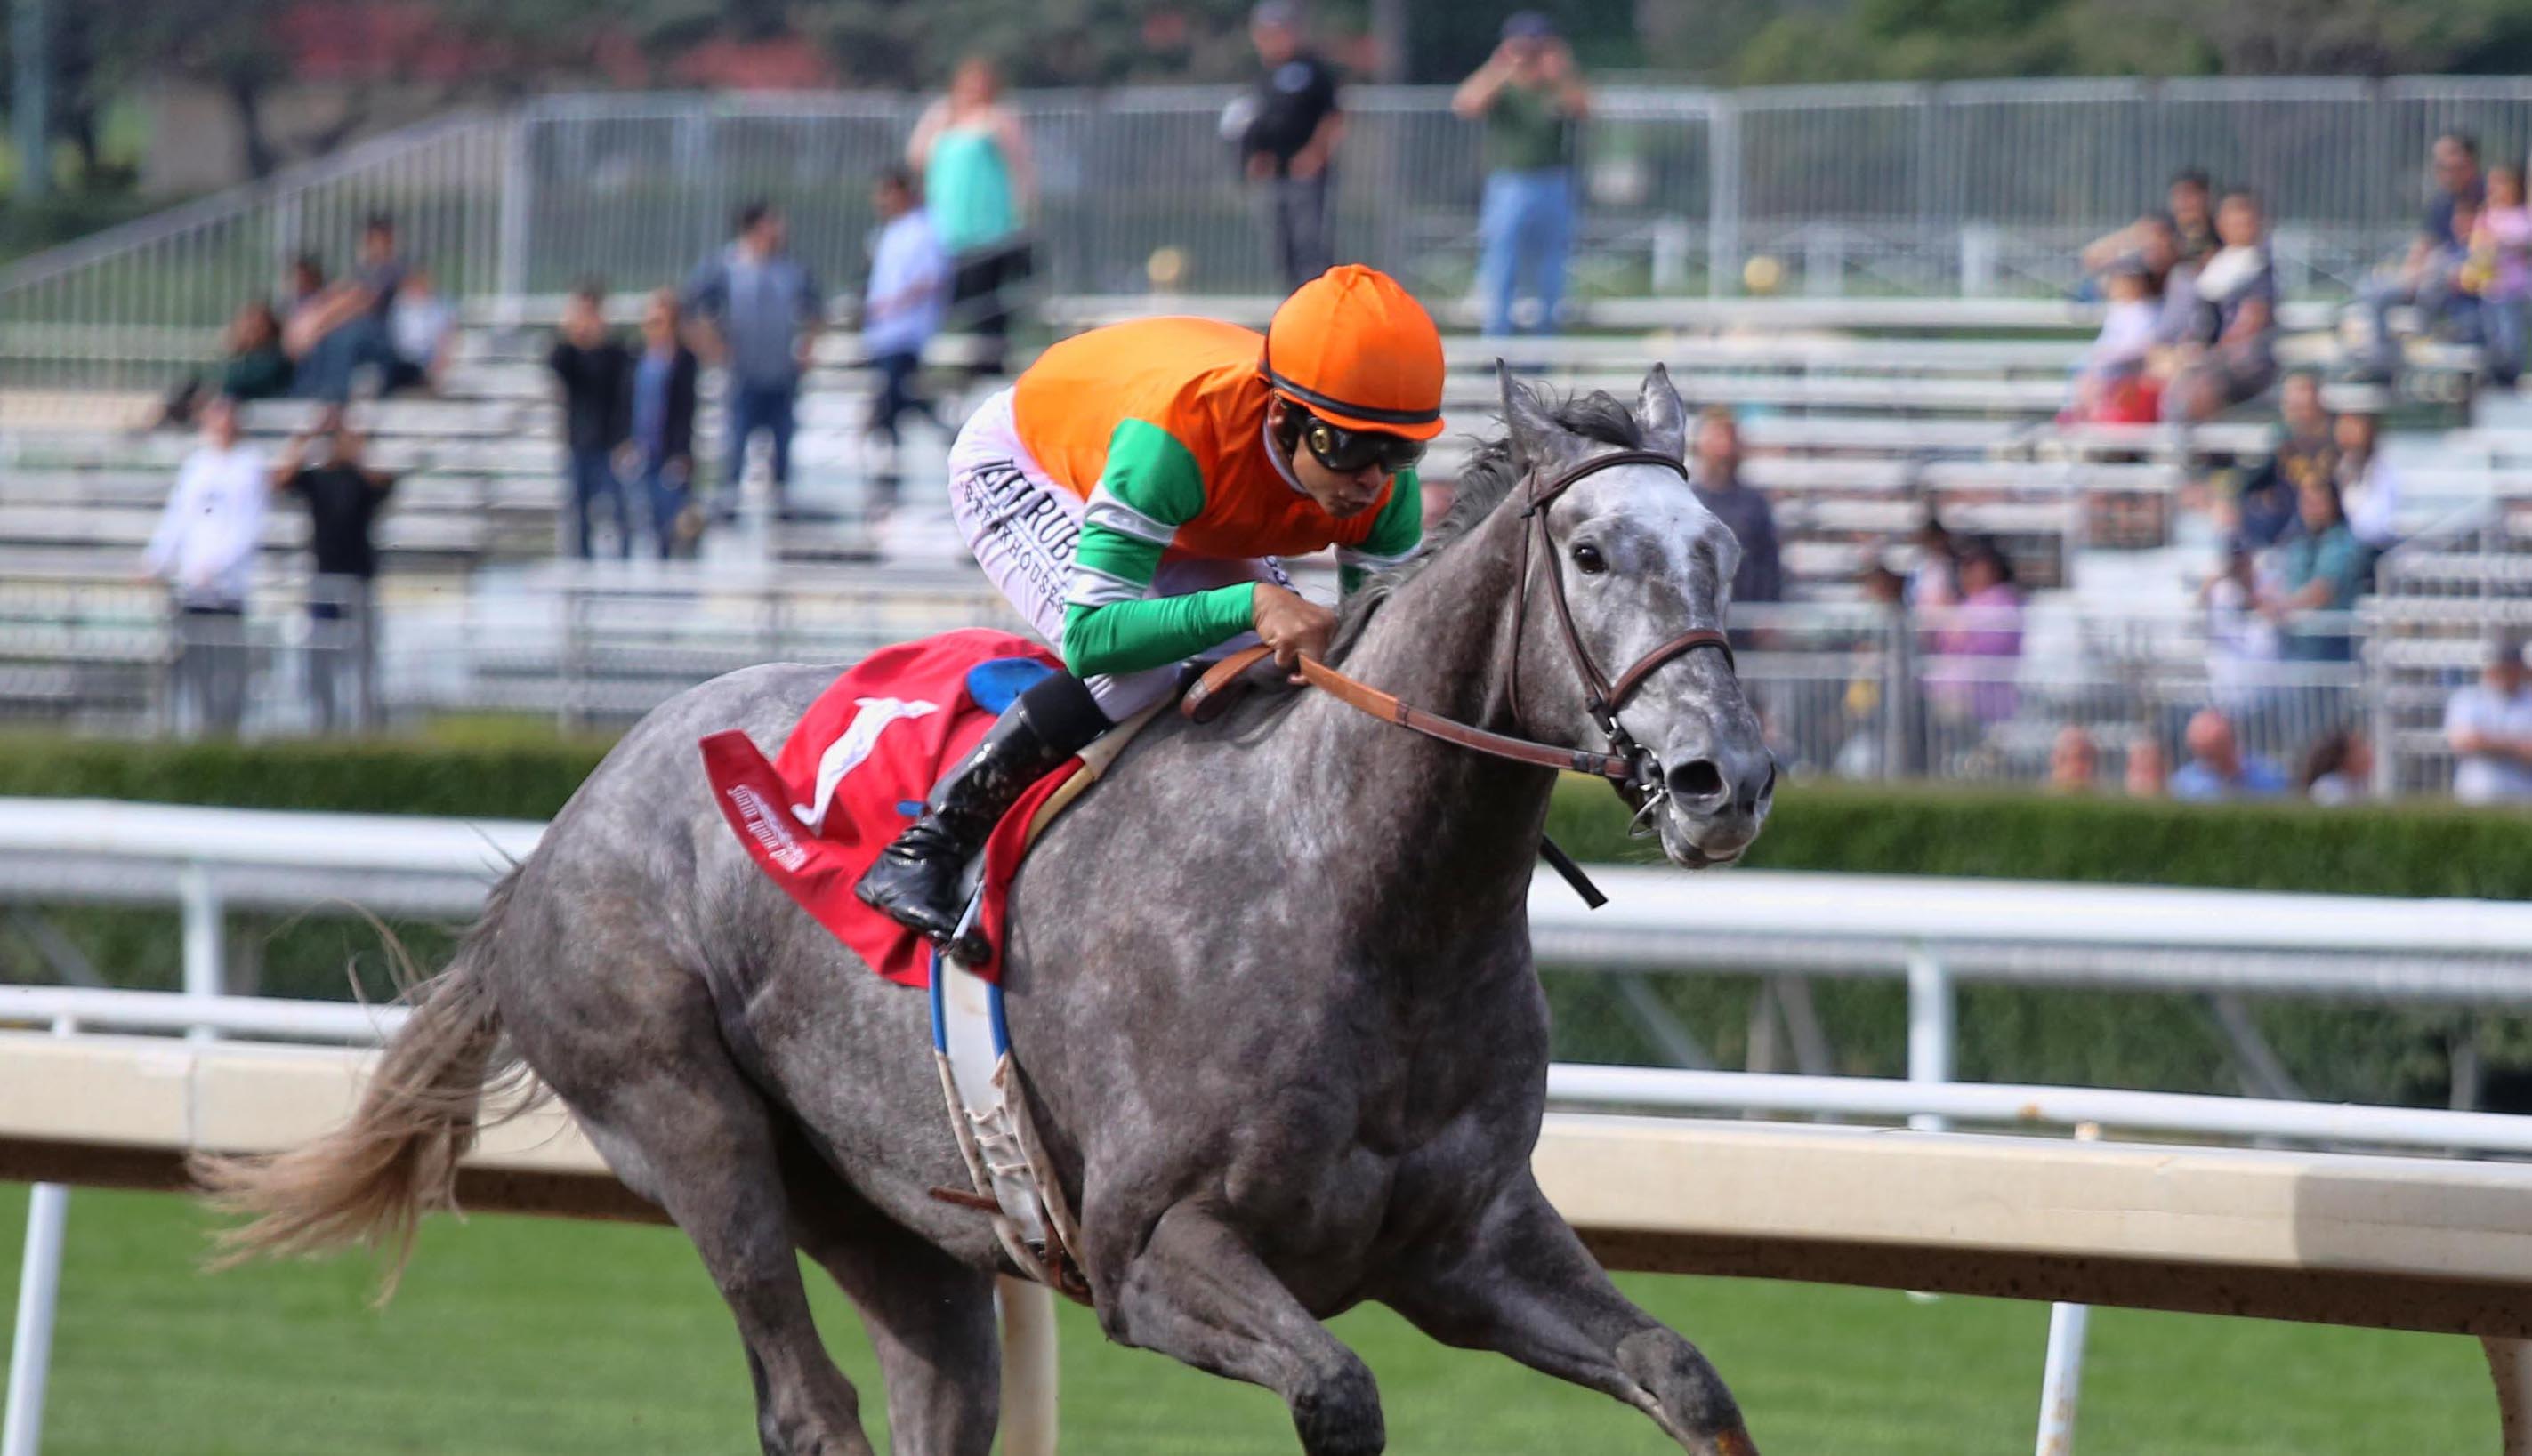 It’s Post Time by Jon White: My Eclipse Award Predictions